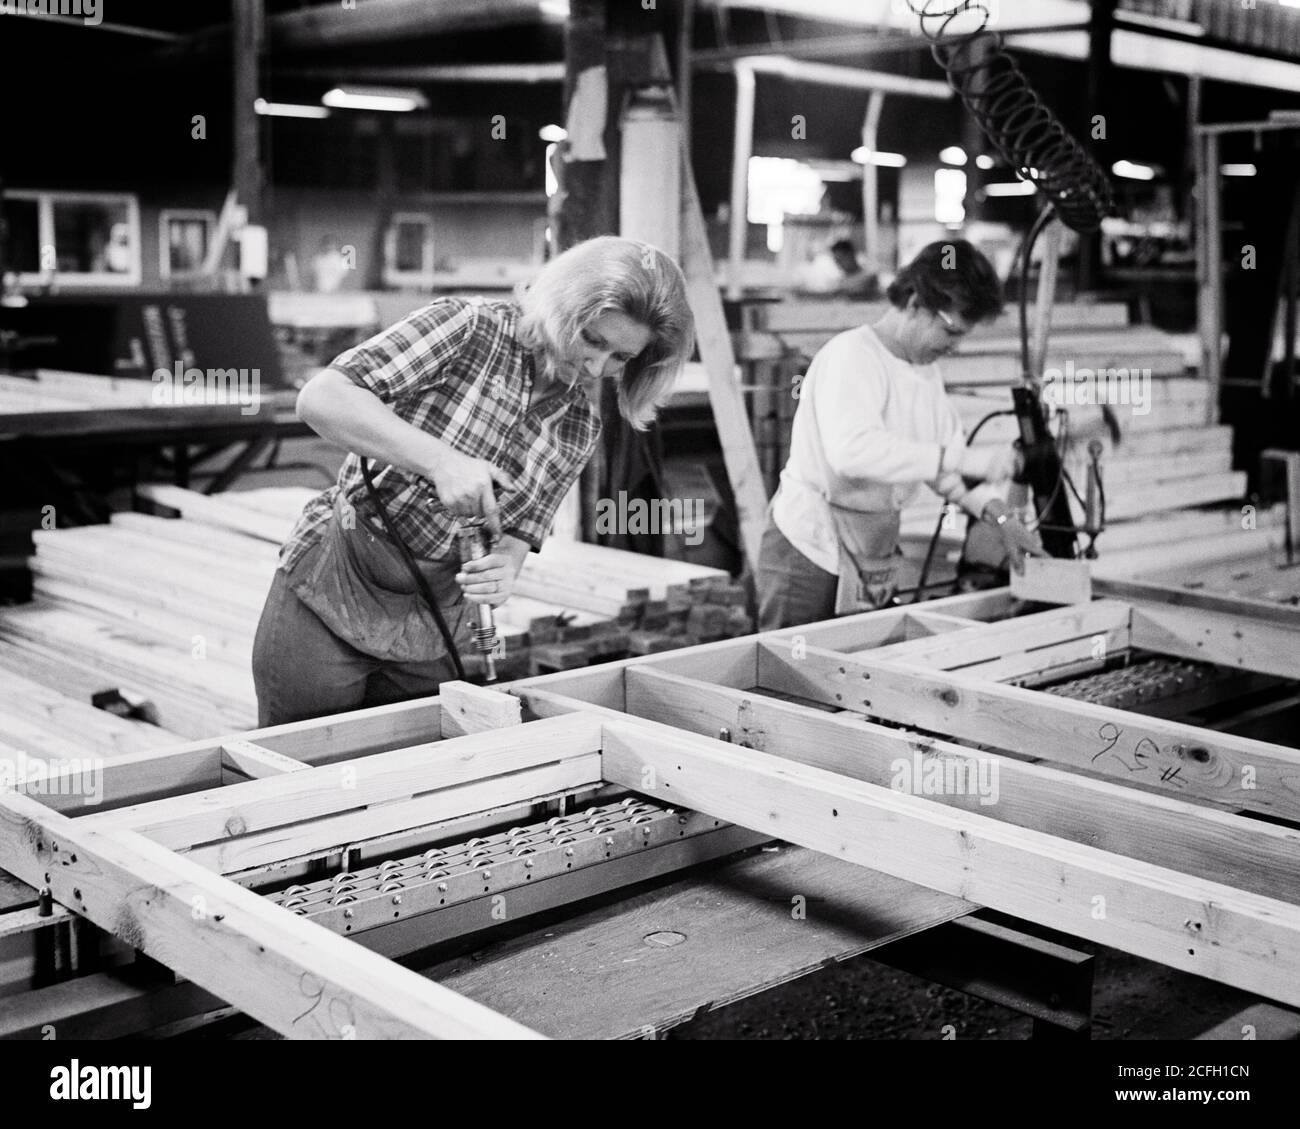 1960s 1970s TWO WORKERS WOMEN ON PREFAB FACTORY FLOOR ASSEMBLING A WOODEN FRAME FOR USE IN PREFABRICATED BUILDING  - i5633 HAR001 HARS HALF-LENGTH LADIES PERSONS PROFESSION B&W SKILL OCCUPATION SKILLS EQUAL PAY WOMEN'S RIGHTS CAREERS ASSEMBLING INNOVATION LABOR EMPLOYMENT OCCUPATIONS EQUAL RIGHTS EMPLOYEE PREFAB EQUALITY MID-ADULT MID-ADULT WOMAN PRECISION PREFABRICATION USE YOUNG ADULT WOMAN BLACK AND WHITE CAUCASIAN ETHNICITY HAR001 LABORING OLD FASHIONED Stock Photo